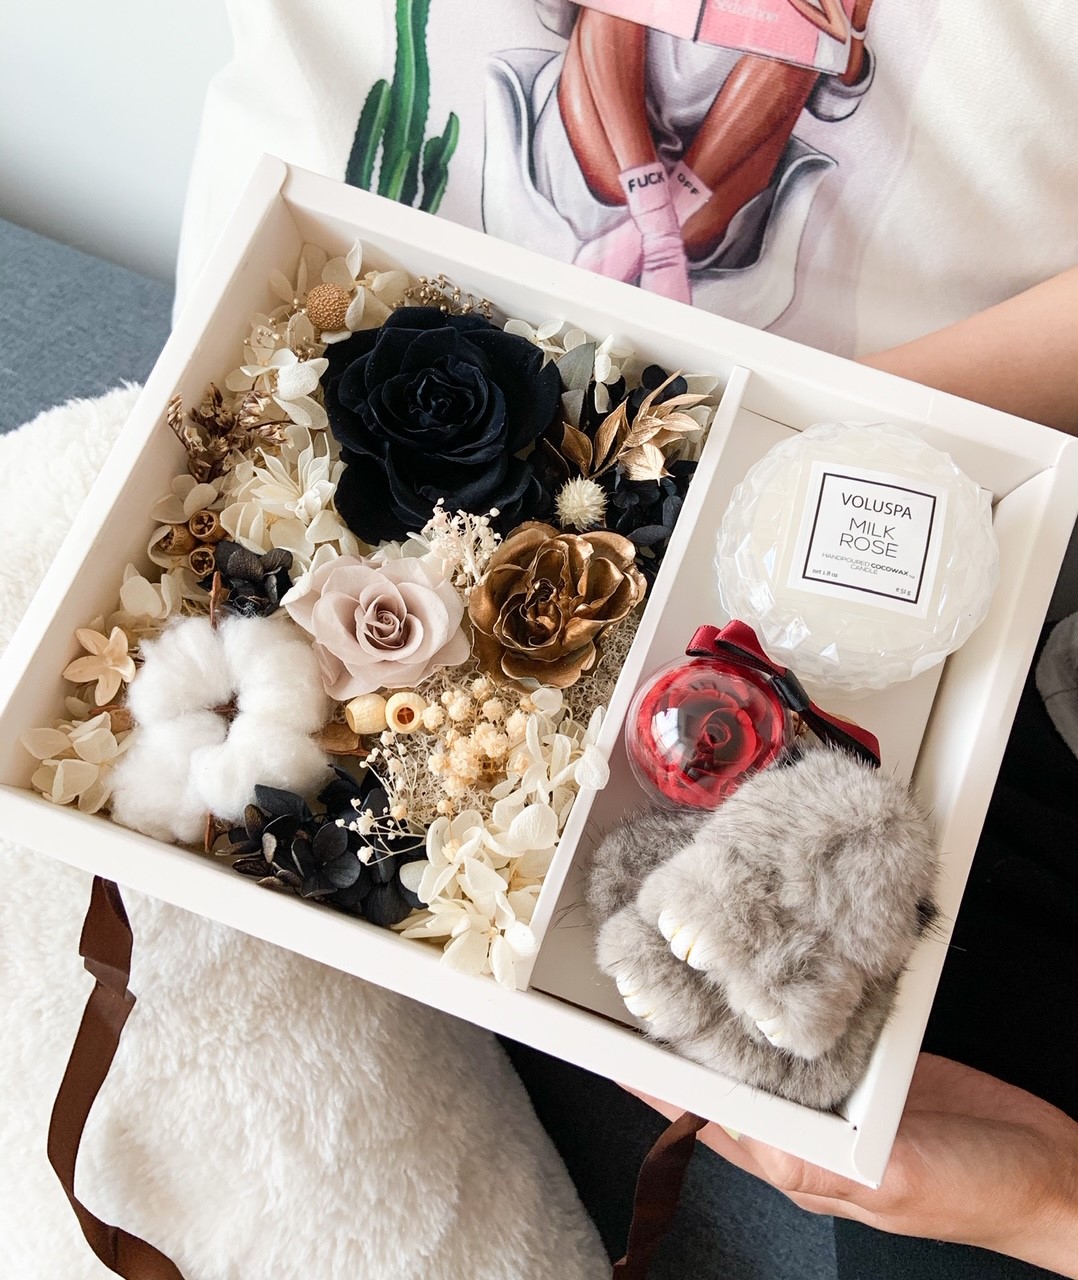 Gifts Under $50 – The Little Bloom Box